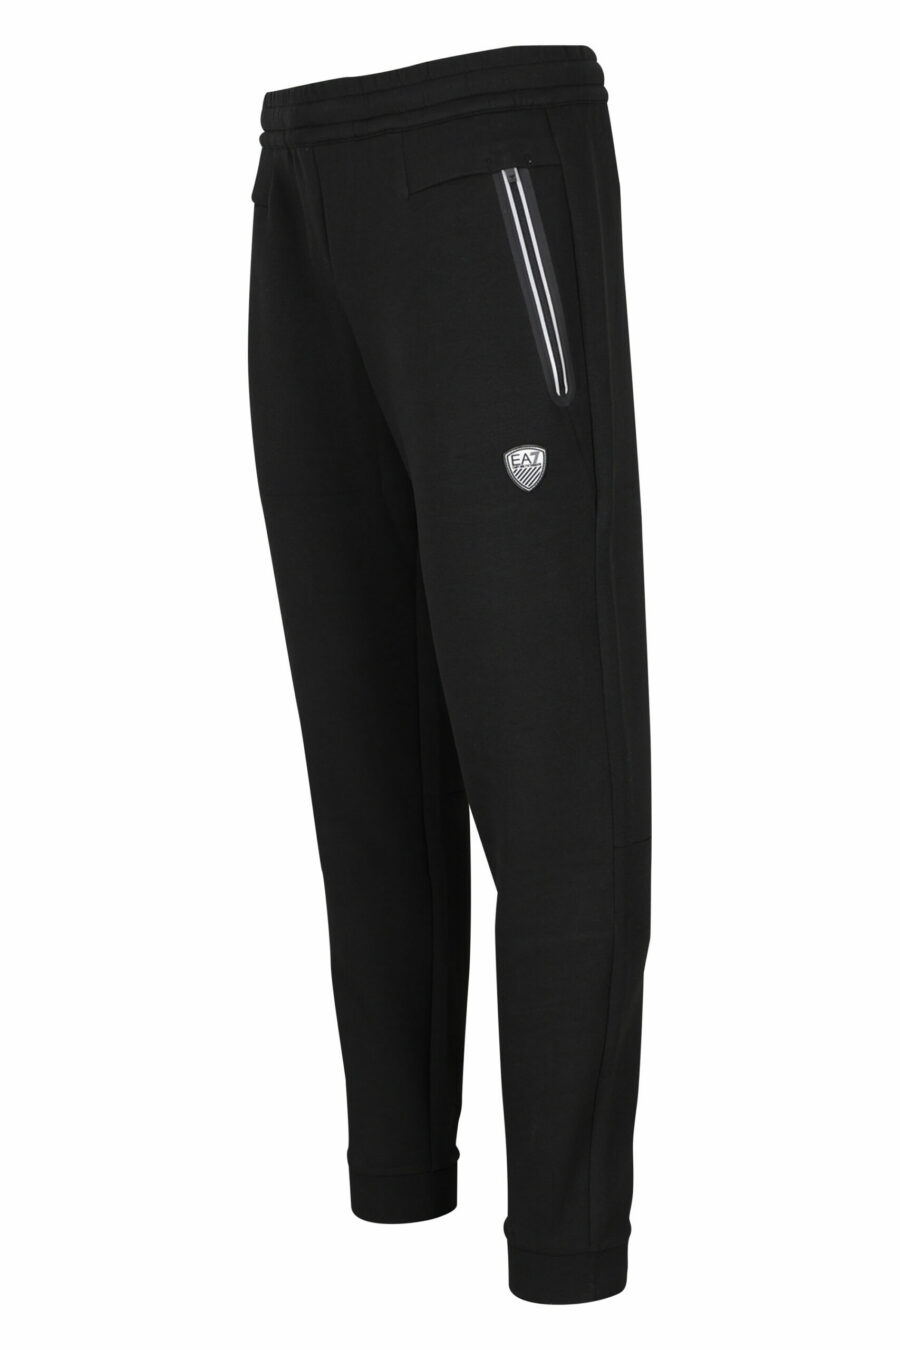 Tracksuit bottoms black with mini logo shield "lux identity" - 8056787978737 1 scaled